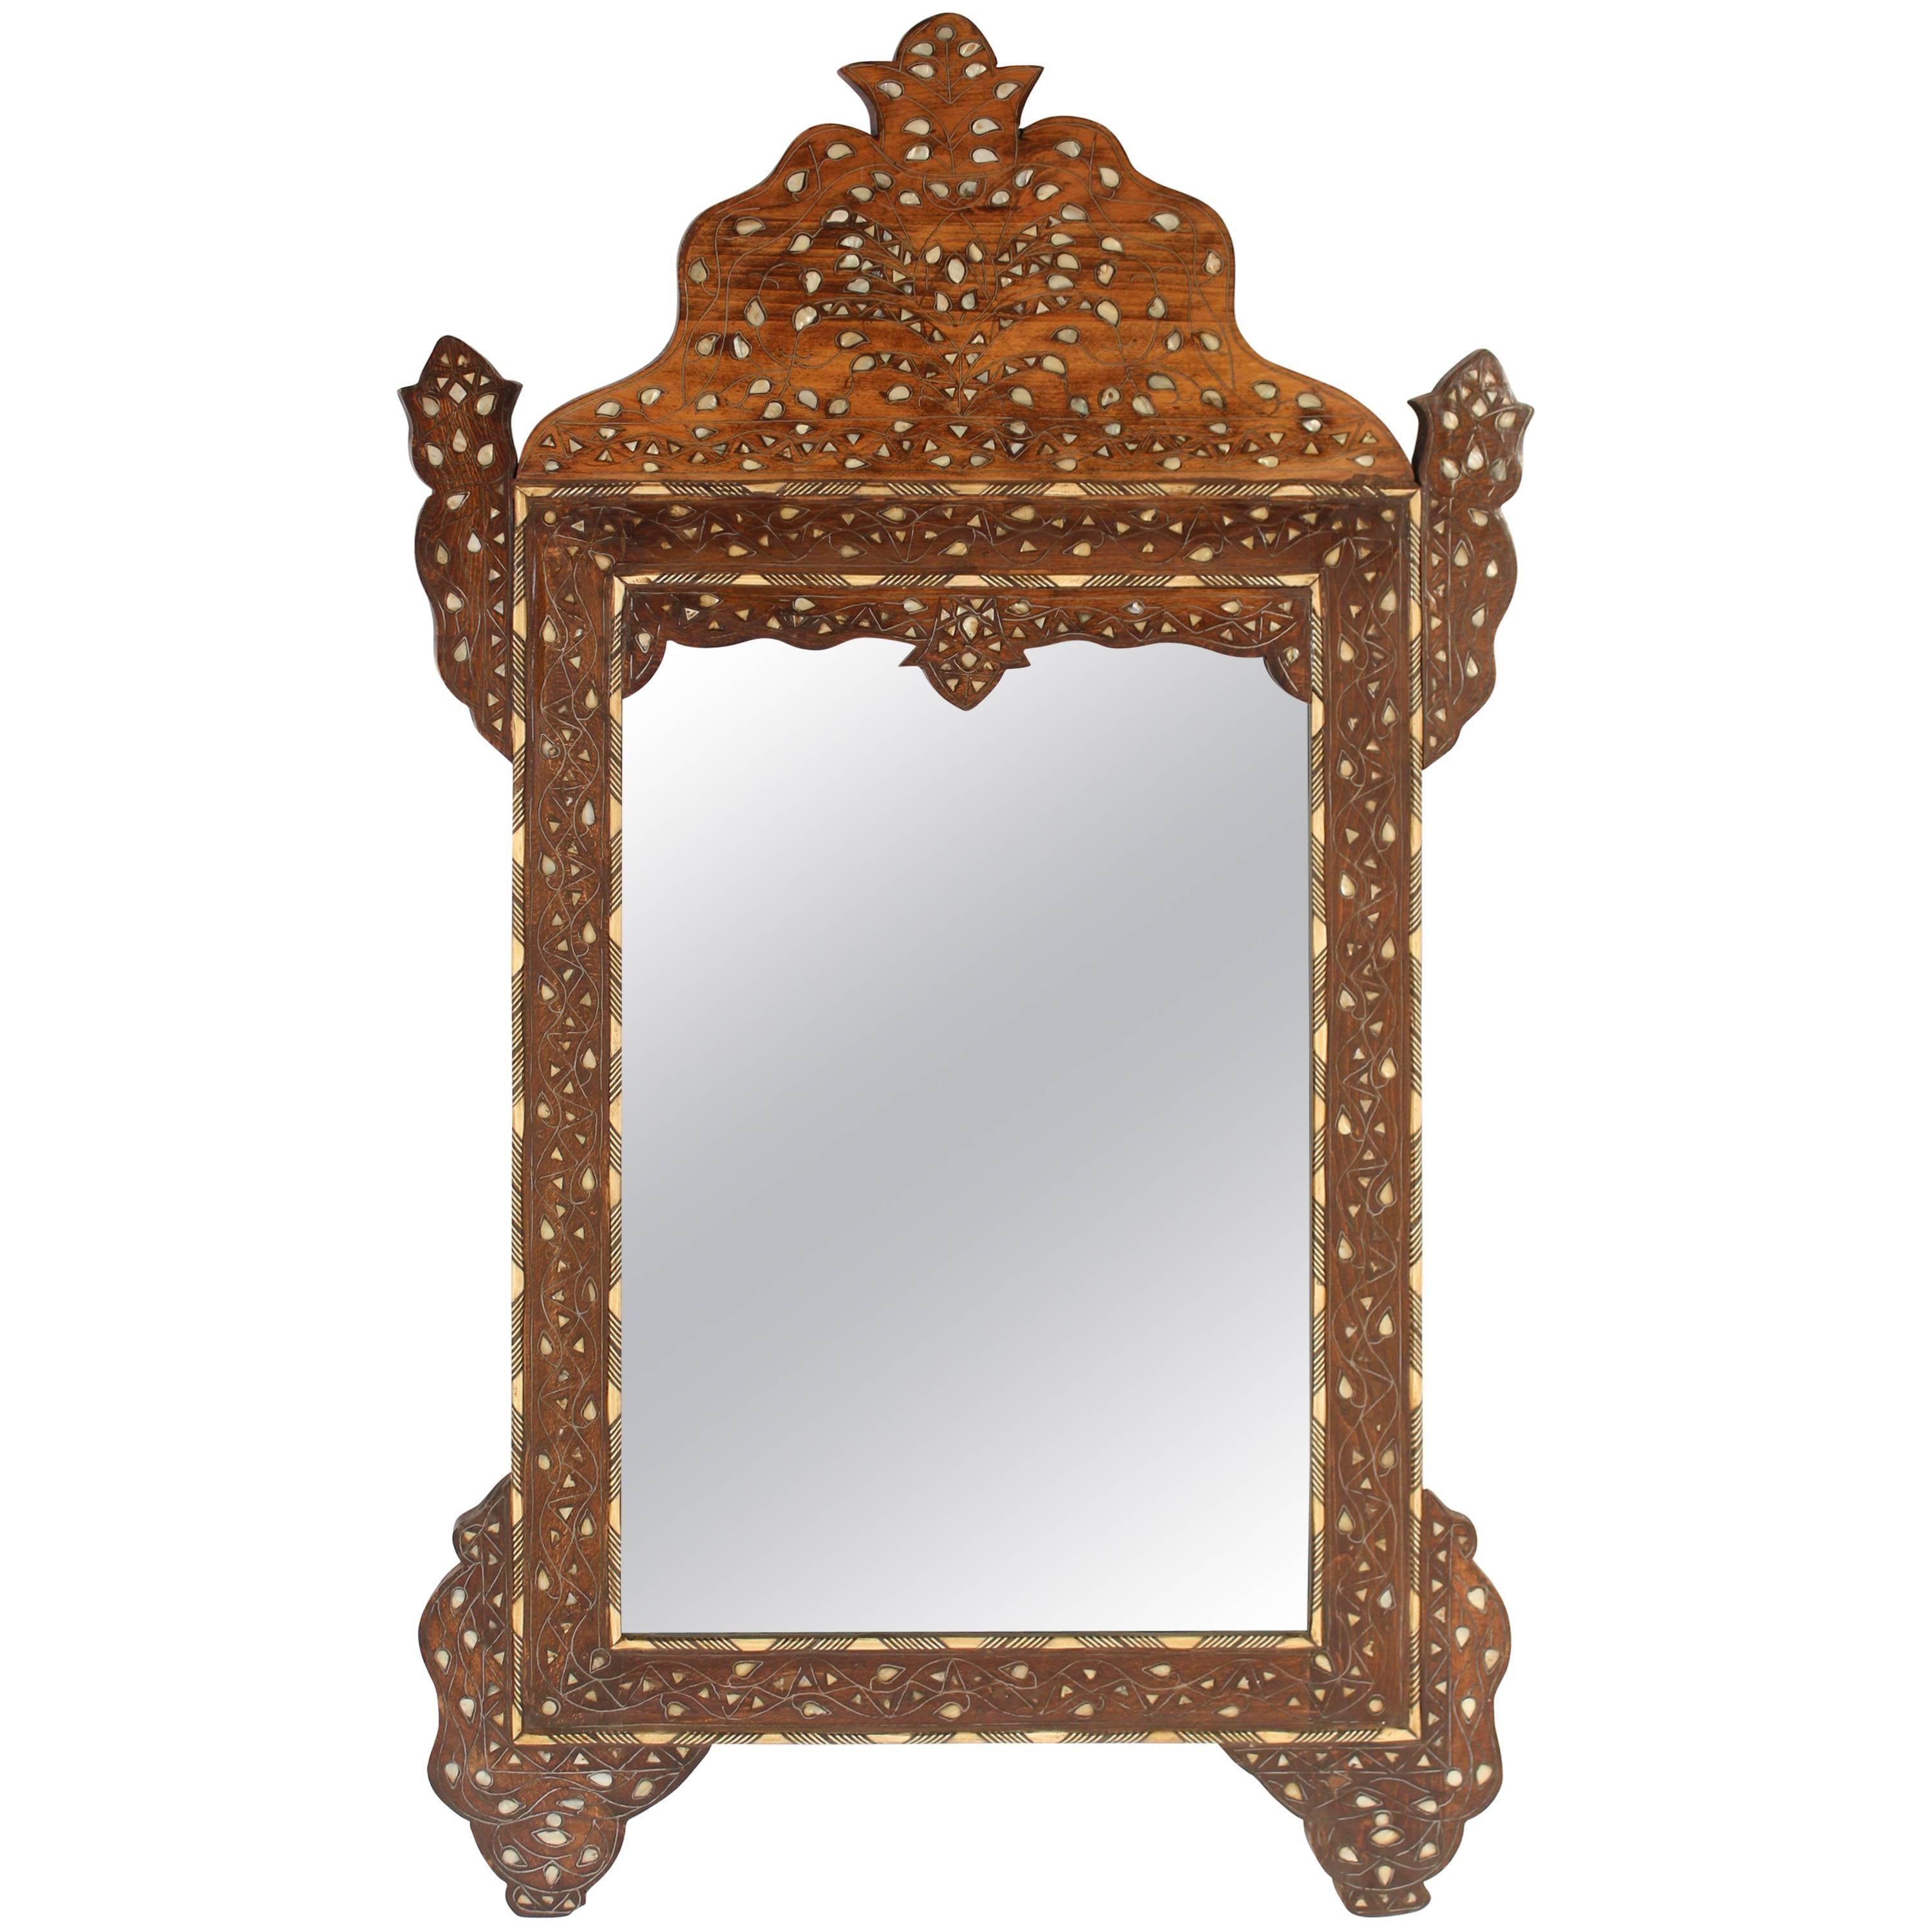 Middle Eastern Mother-of-Pearl Inlaid Mirror